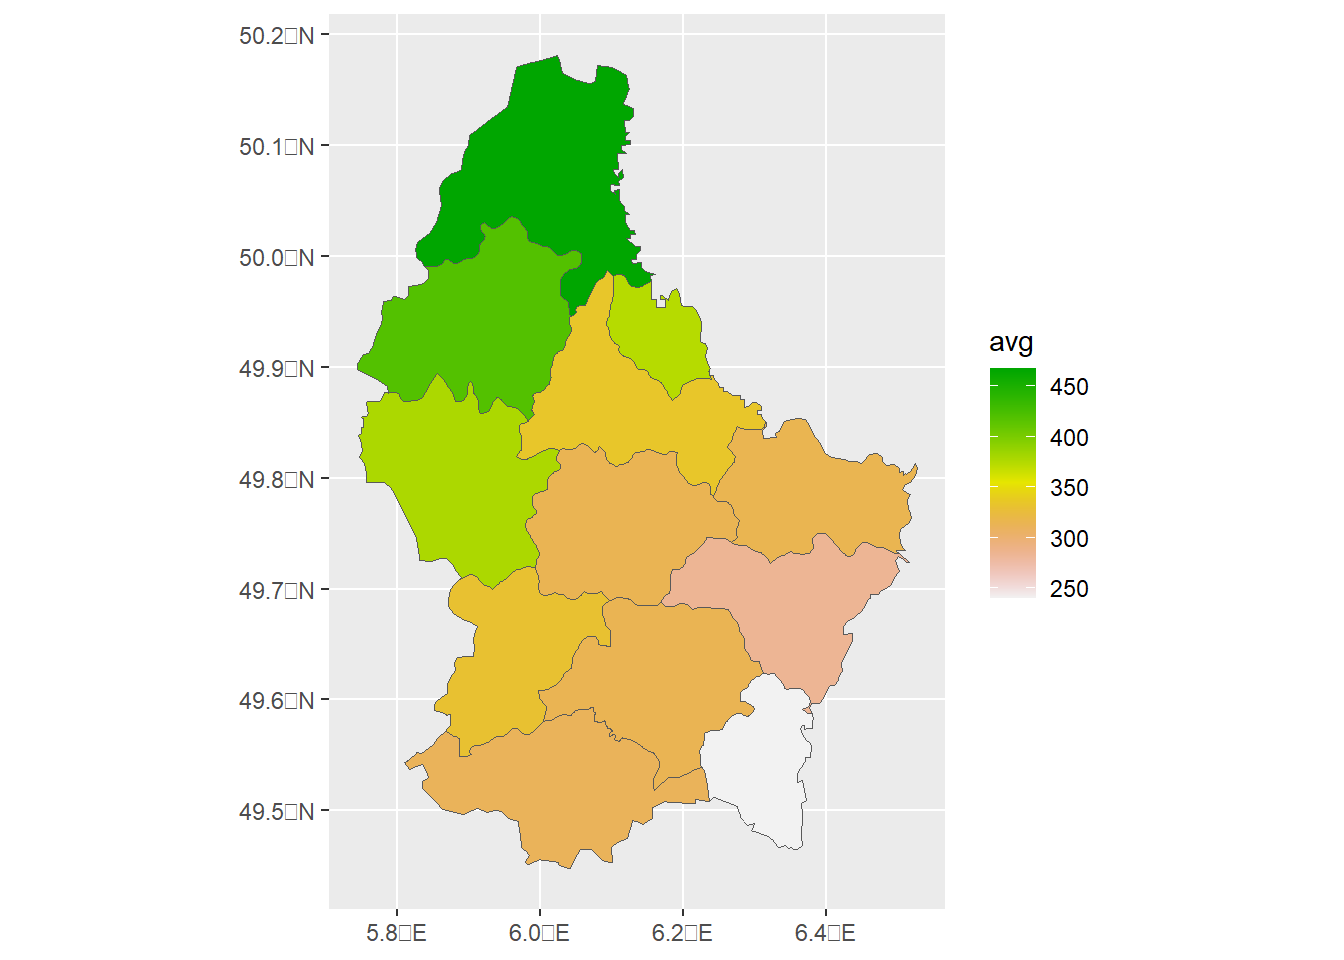 Average and area-weighted average of elevation values in each of the divisions of Luxembourg.